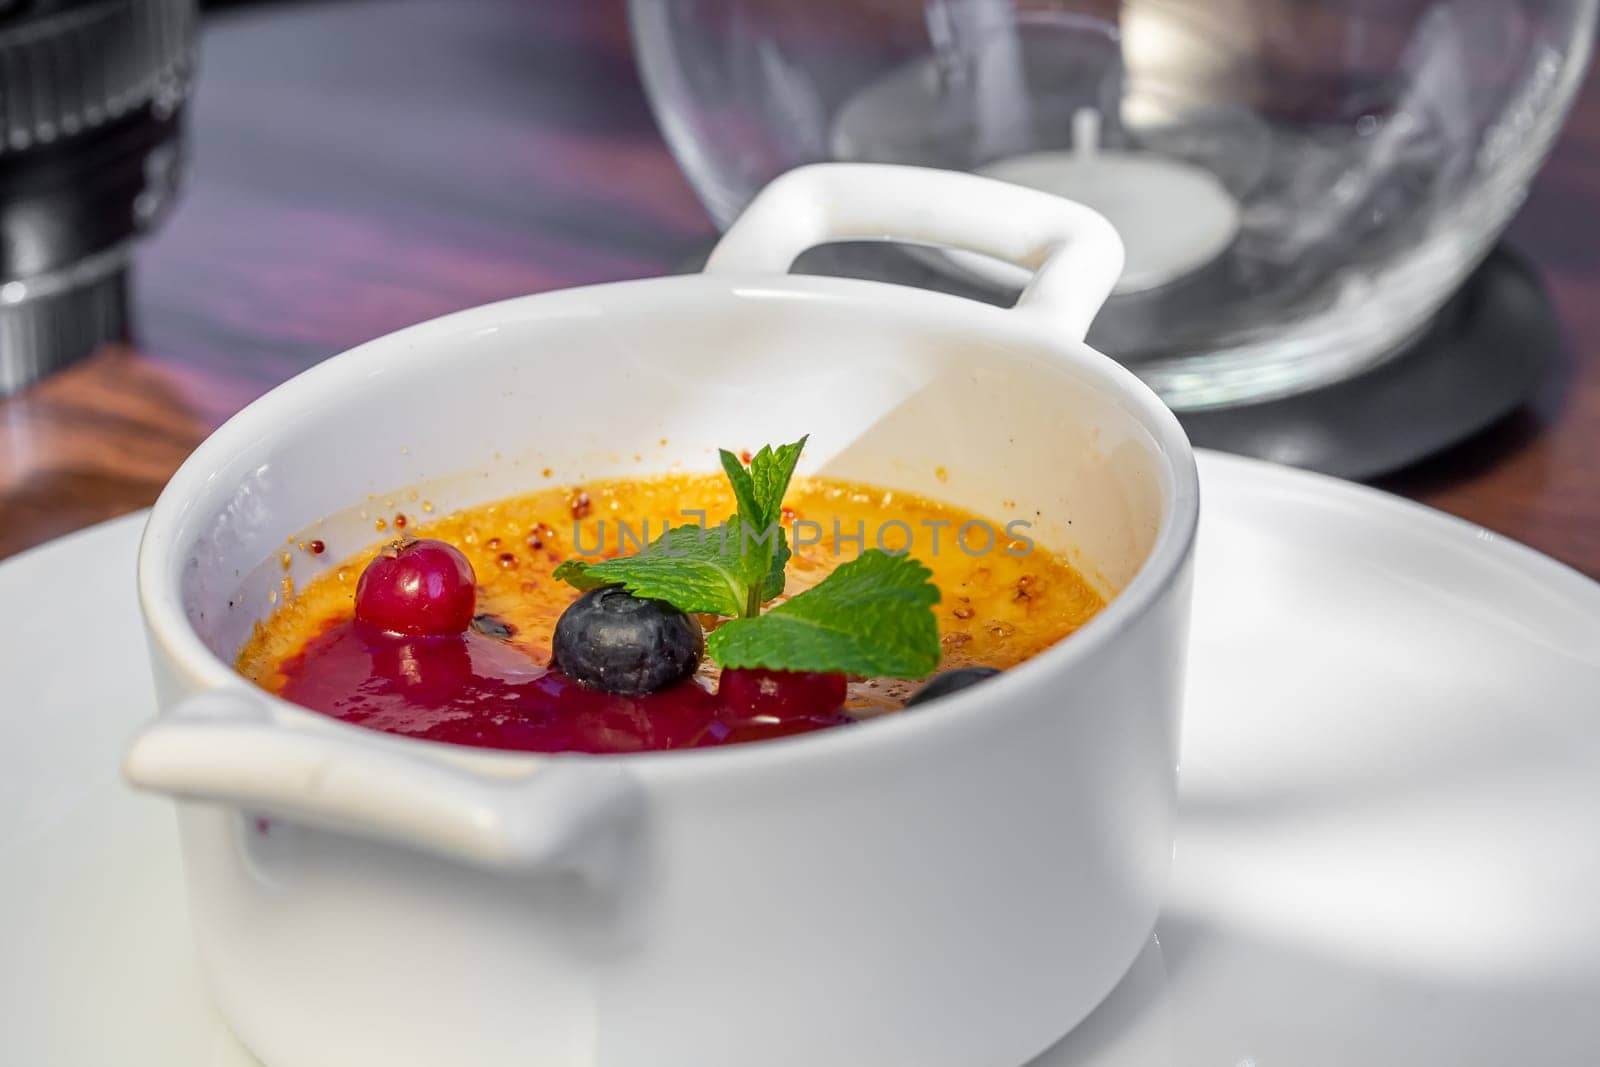 Dessert creme brulee or Catalan cream with mint leaves and berries.